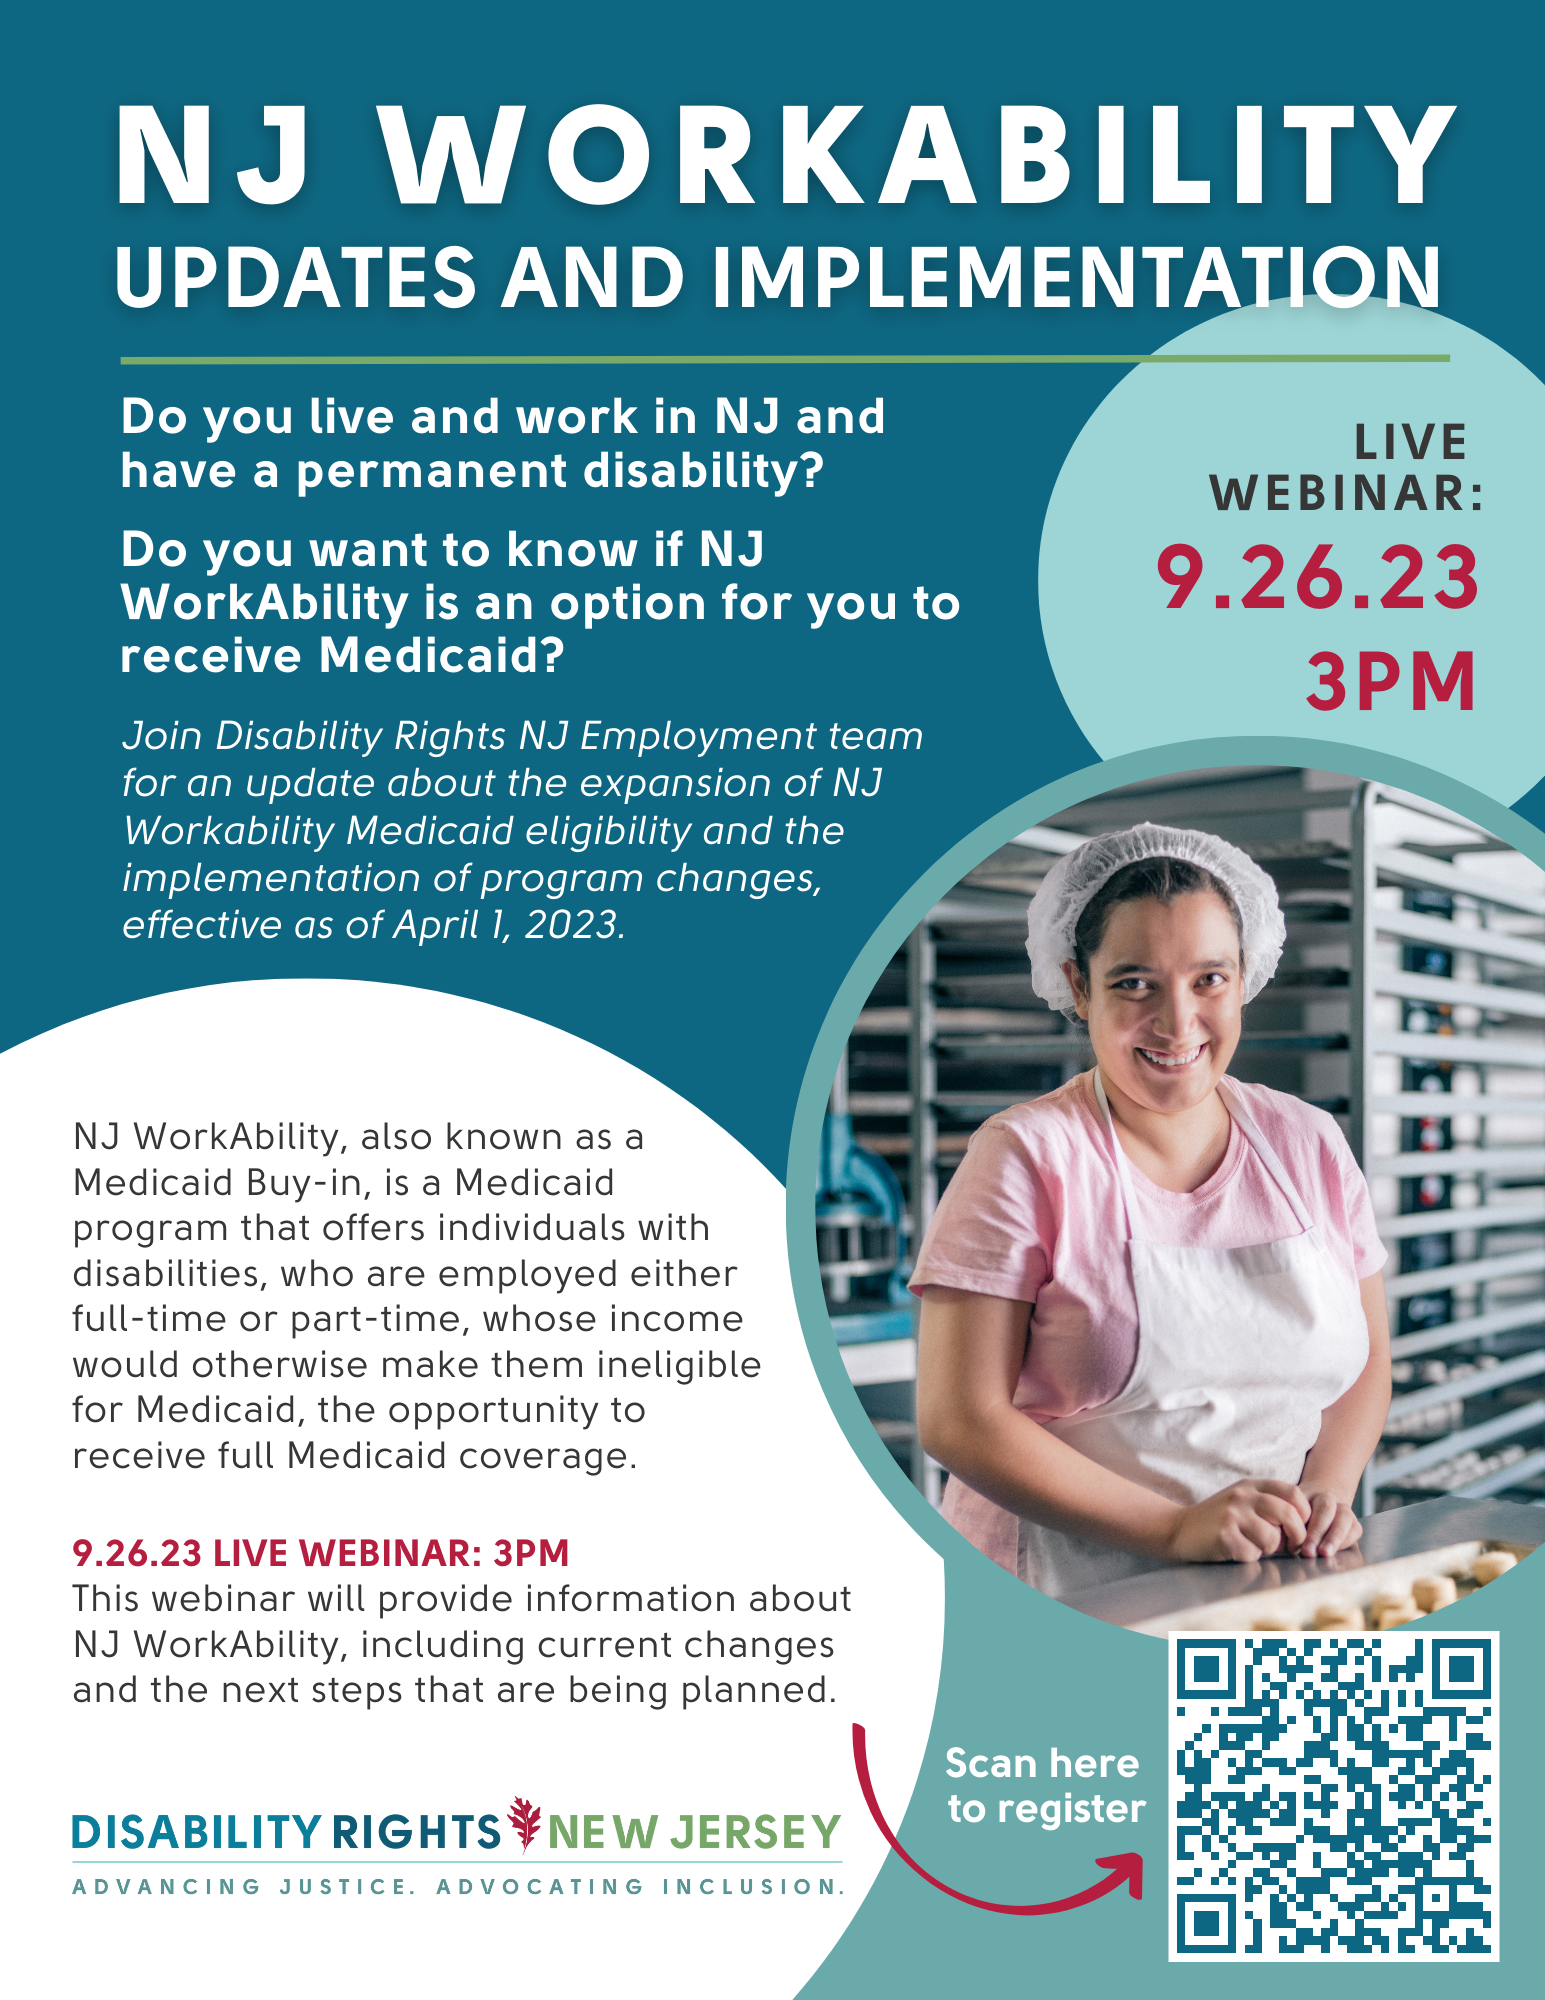 NJ WorkAbility Updates and Implementation